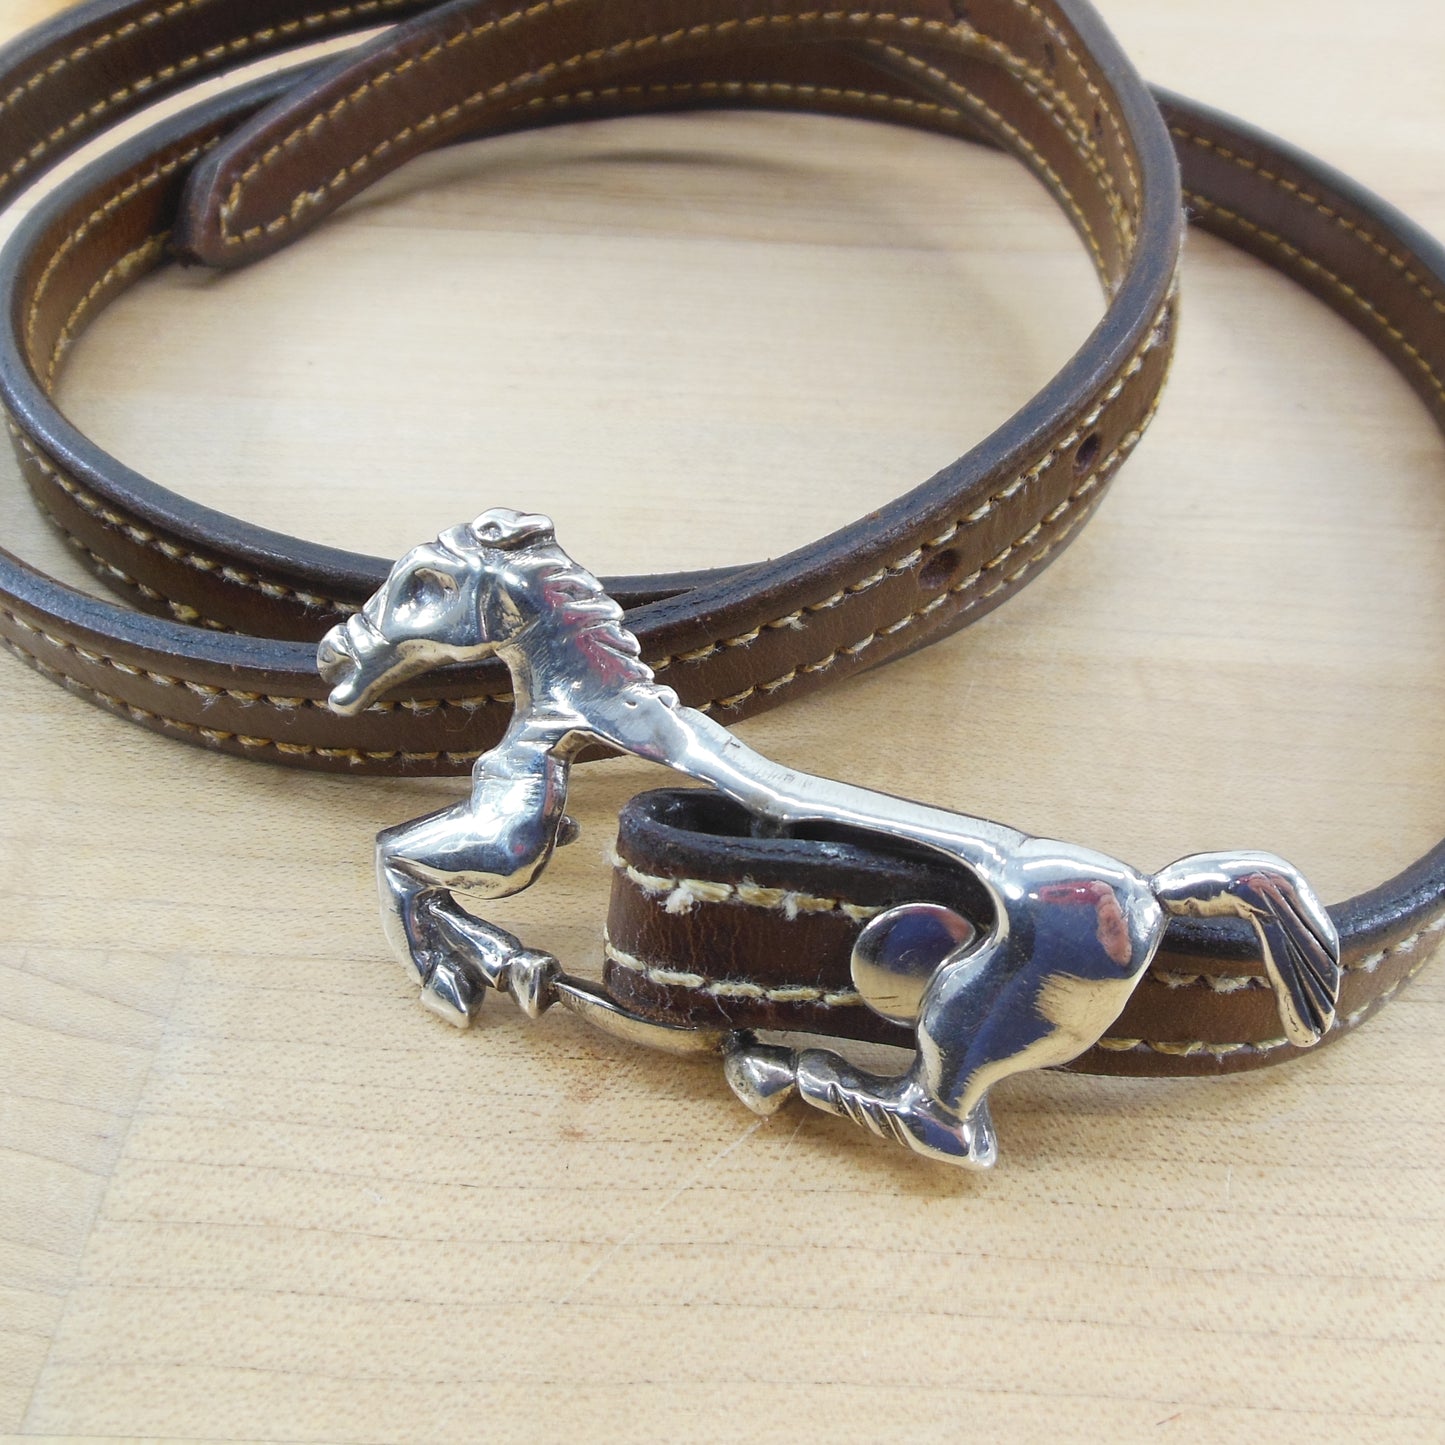 Galloping Horse Silver Buckle Double Stitched Leather Rein Belt Cowgirl Vintage Unbranded